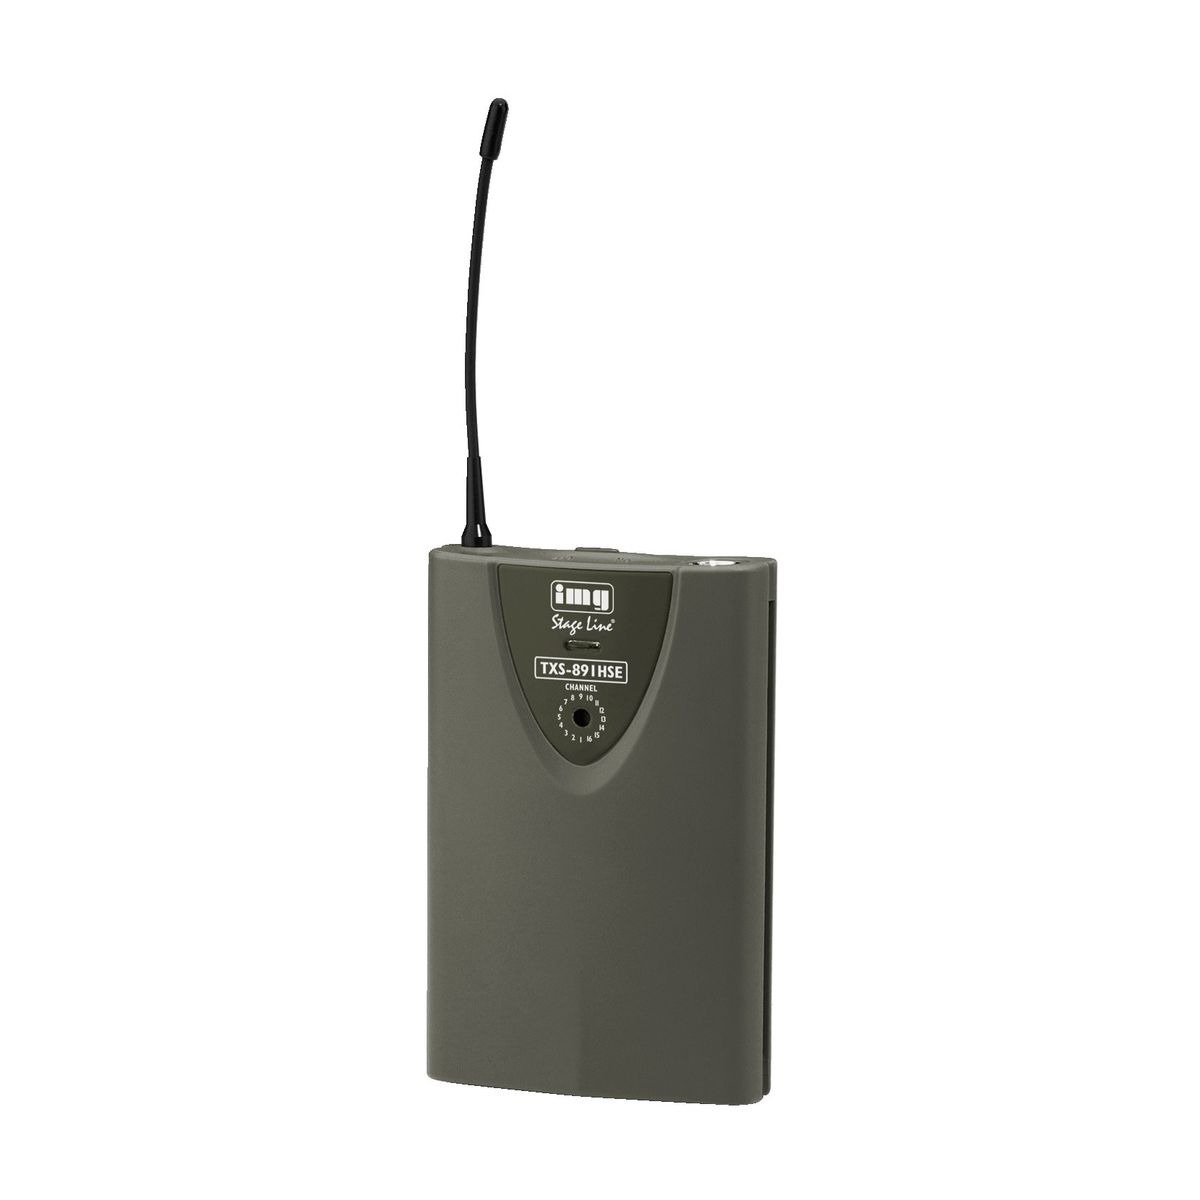 TXS-891HSE | Multifrequency pocket transmitter, 863-865 MHz-0